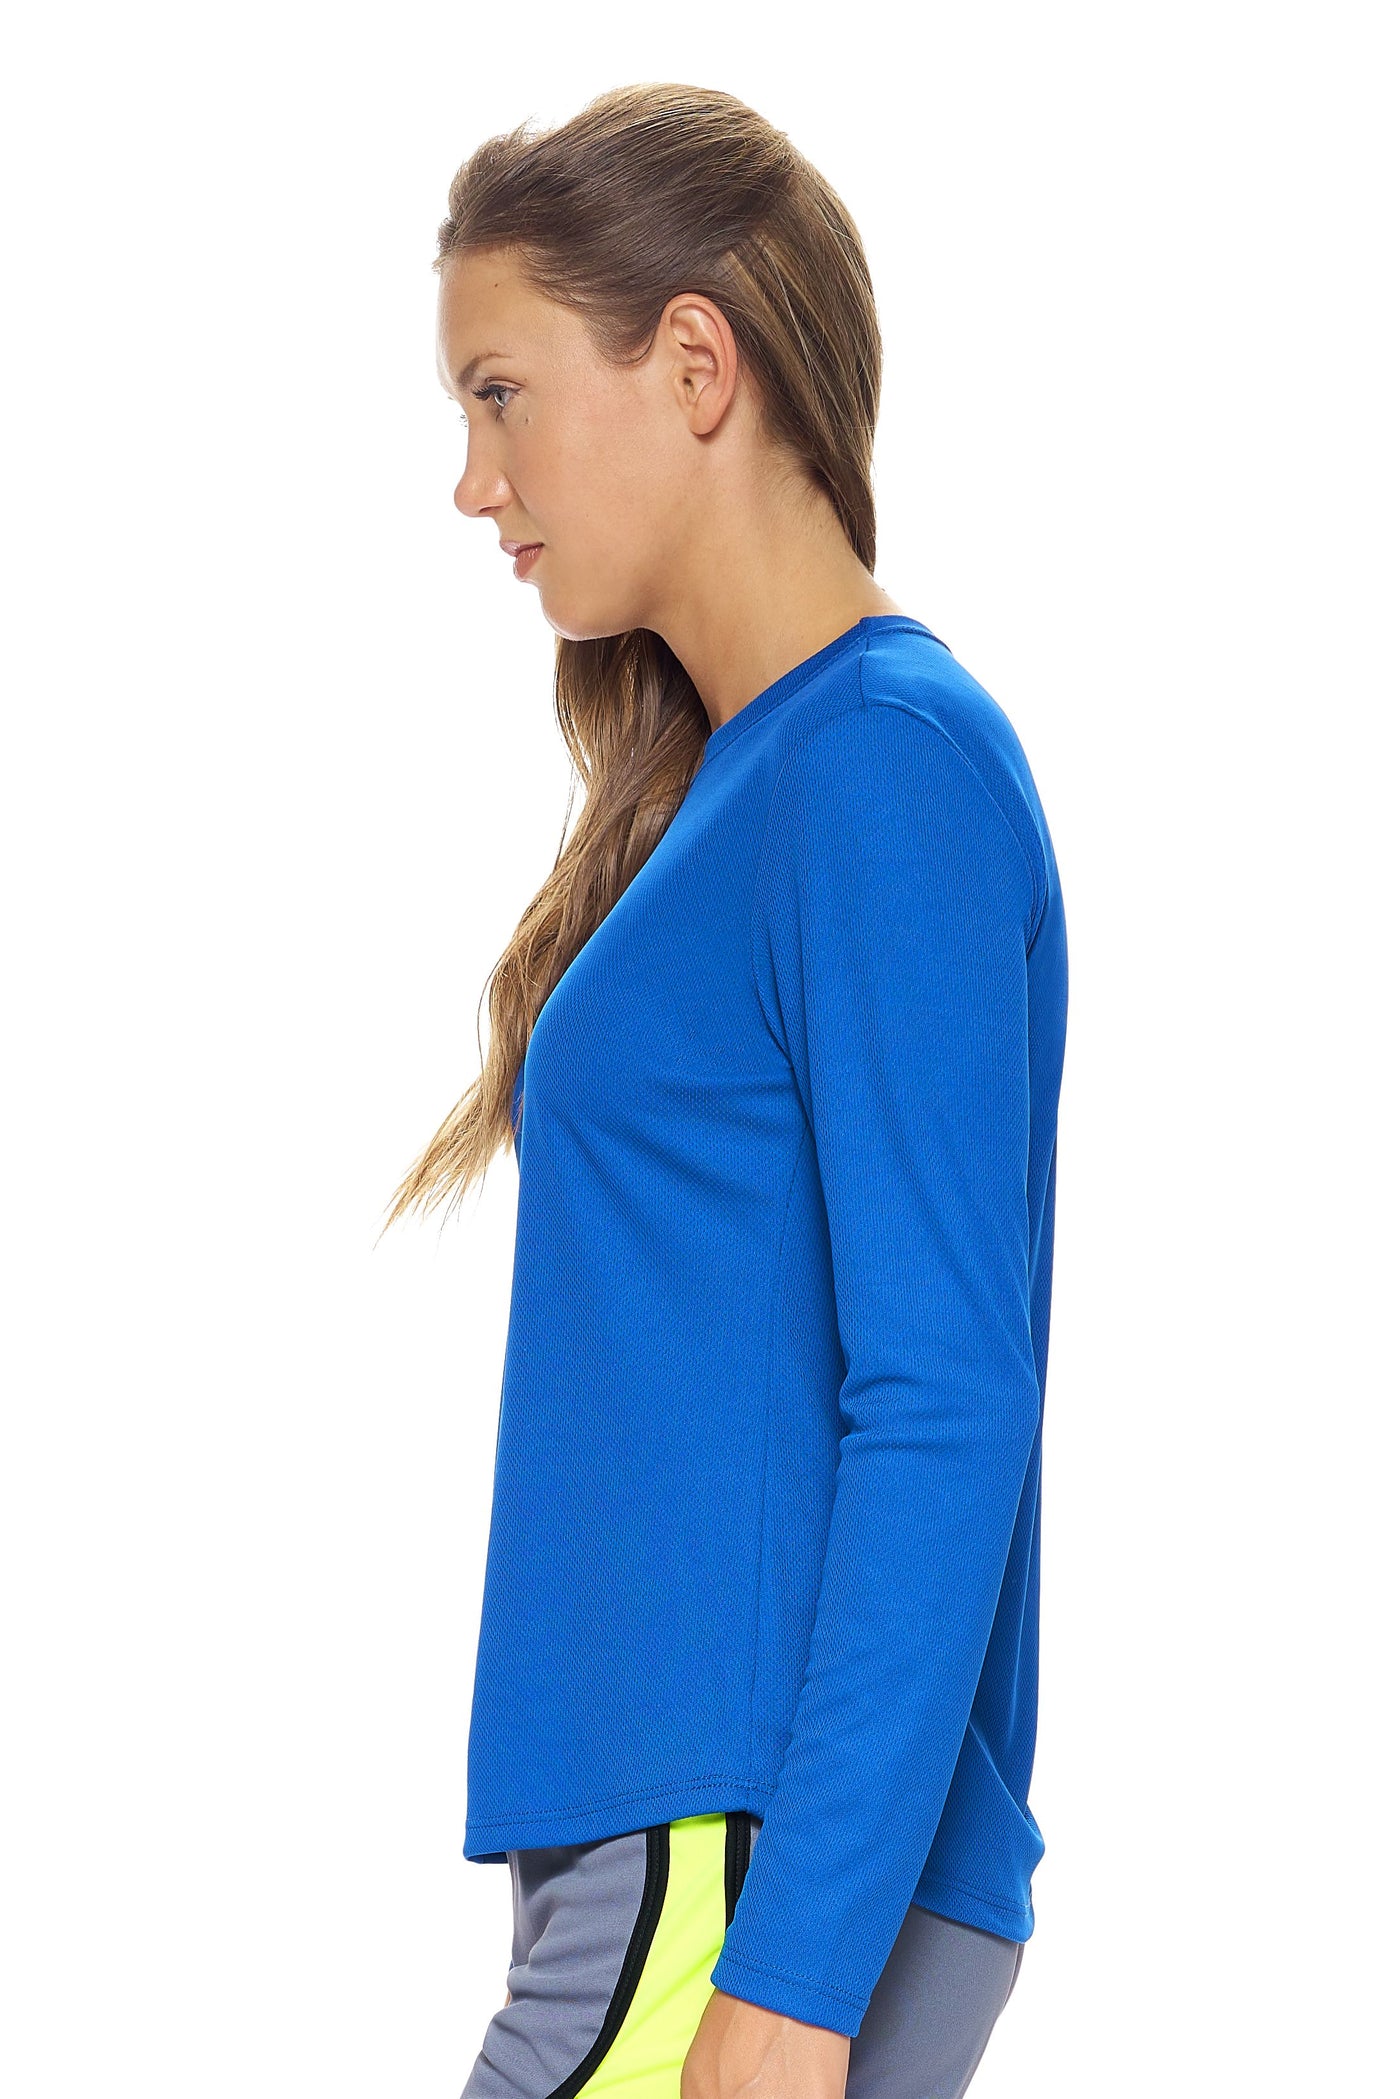 Expert Brand Retail Women's Long Sleeve Crewneck Tec Tee Made in USA Oxymesh royal blue 2#color_royal-blue